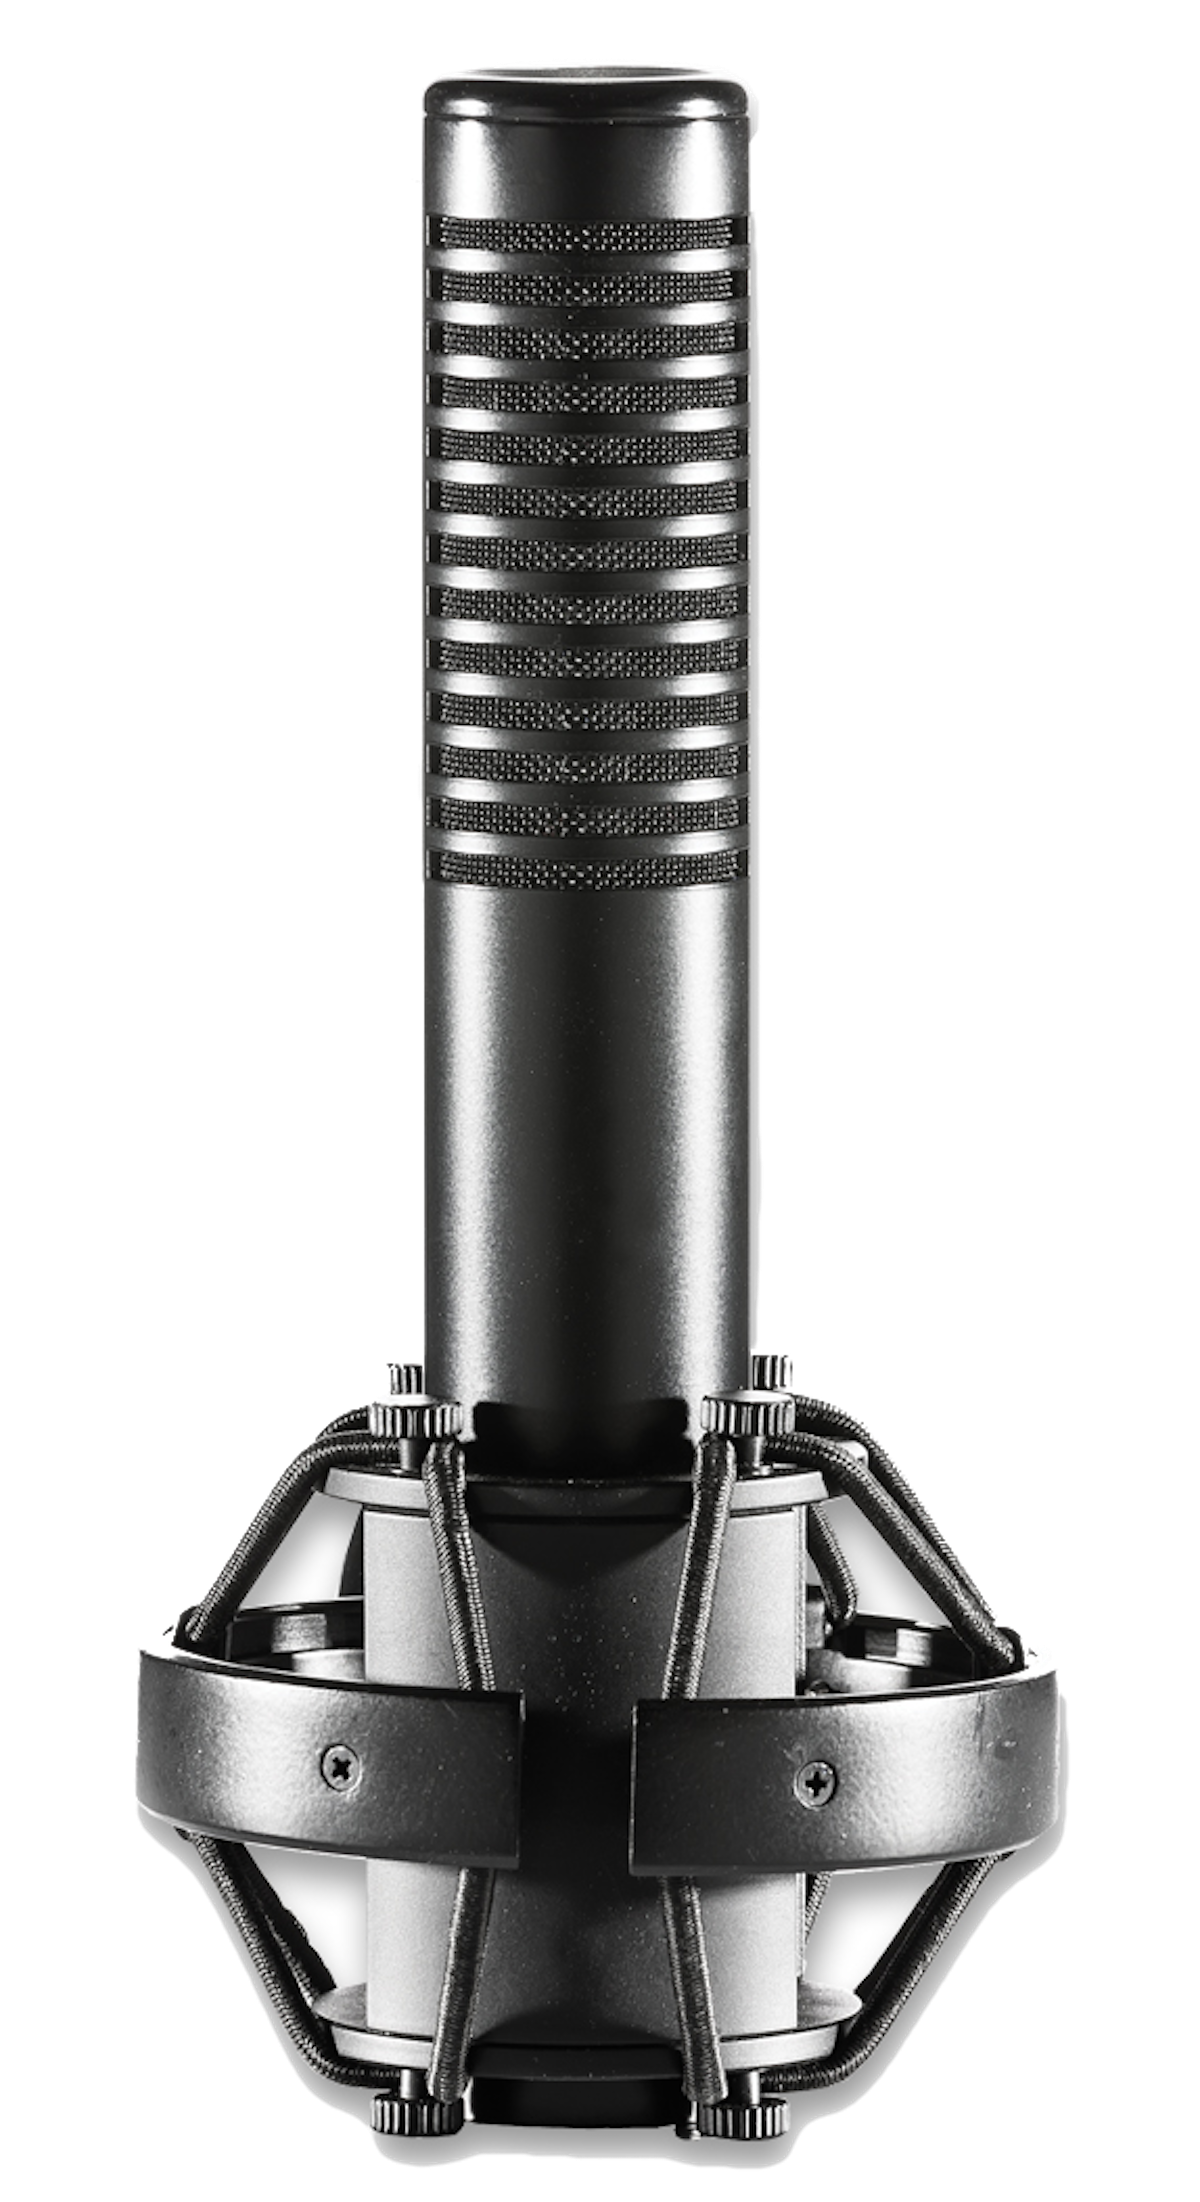 Active Ribbon Microphone